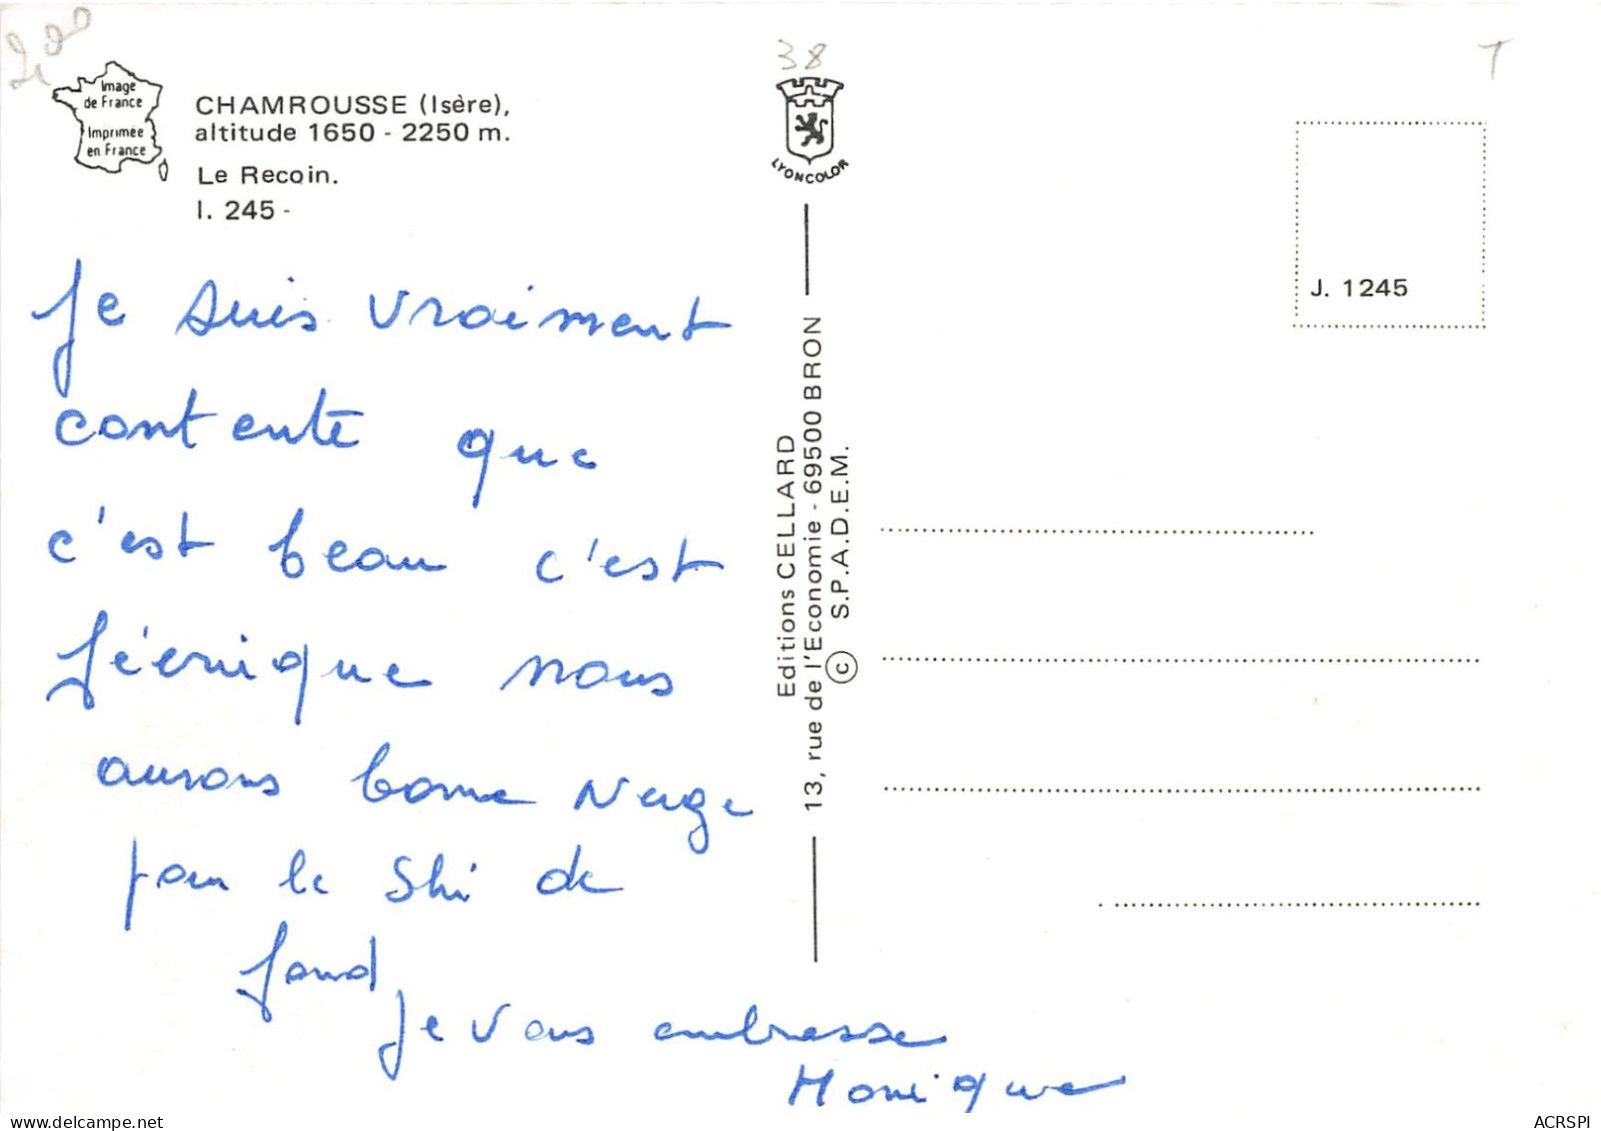 CHAMROUSSE Altitude 1650 2250m Le Recoin 14(scan Recto-verso) MA942 - Chamrousse